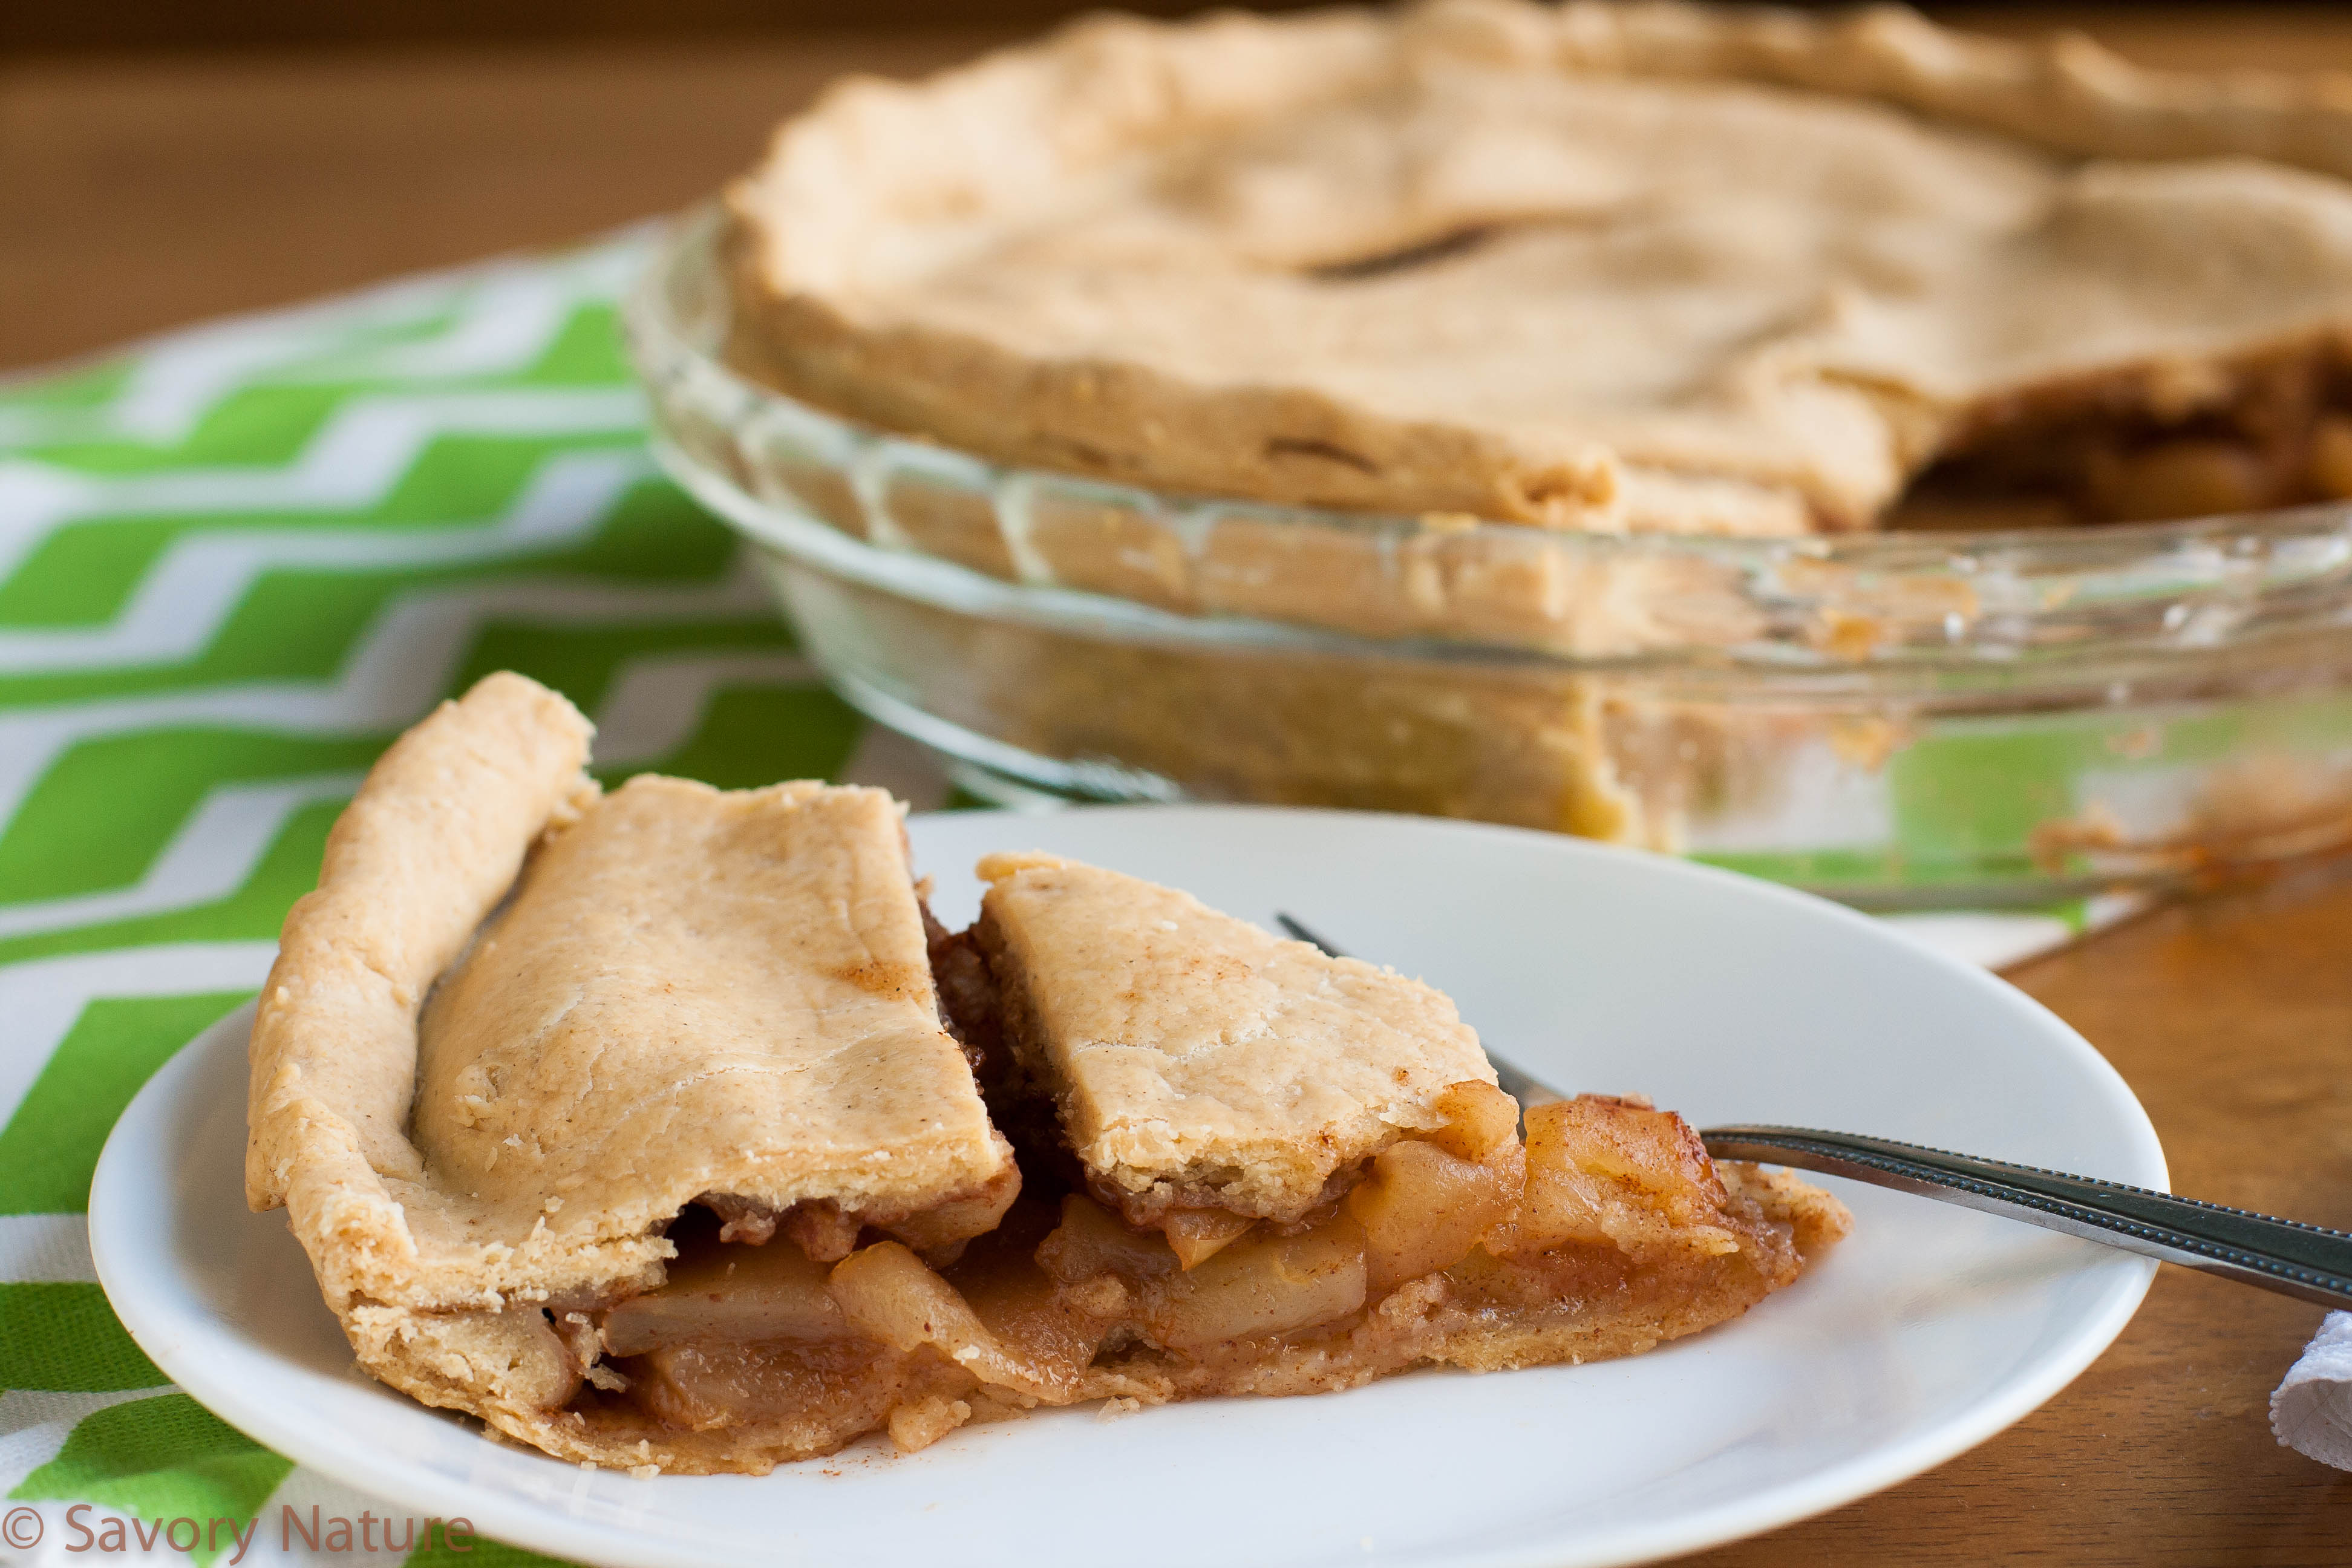 Gluten Free Apple Pie Baking Tips and Great Tasting Pie From Scratch